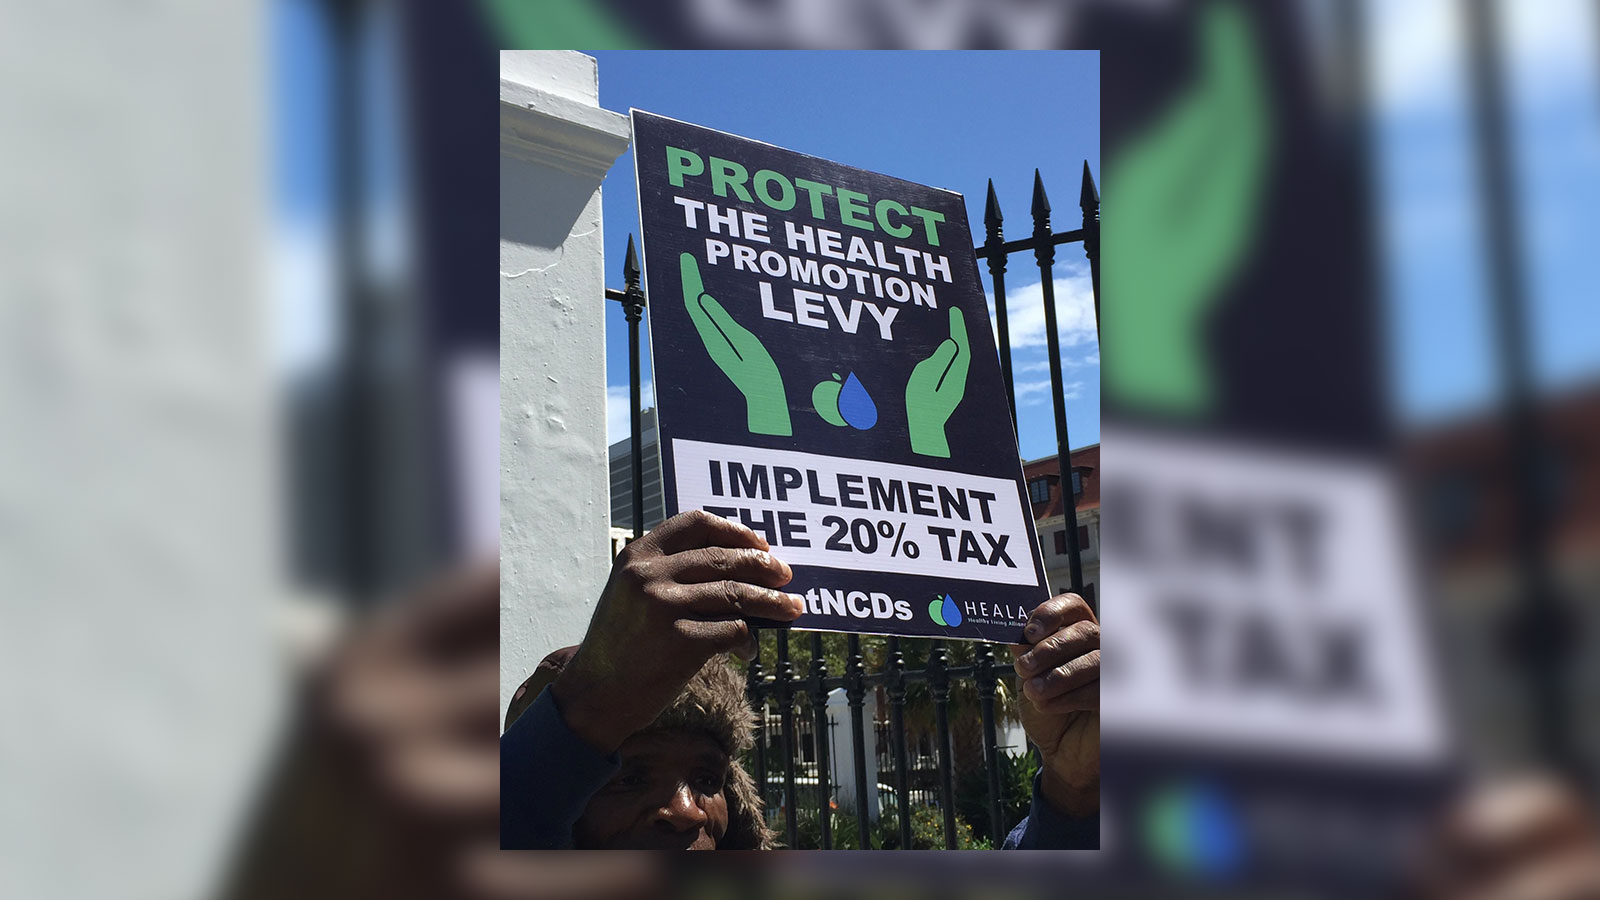 South African partners advocating for a stronger tax outside the parliament in Johannesburg. Source: HEALA